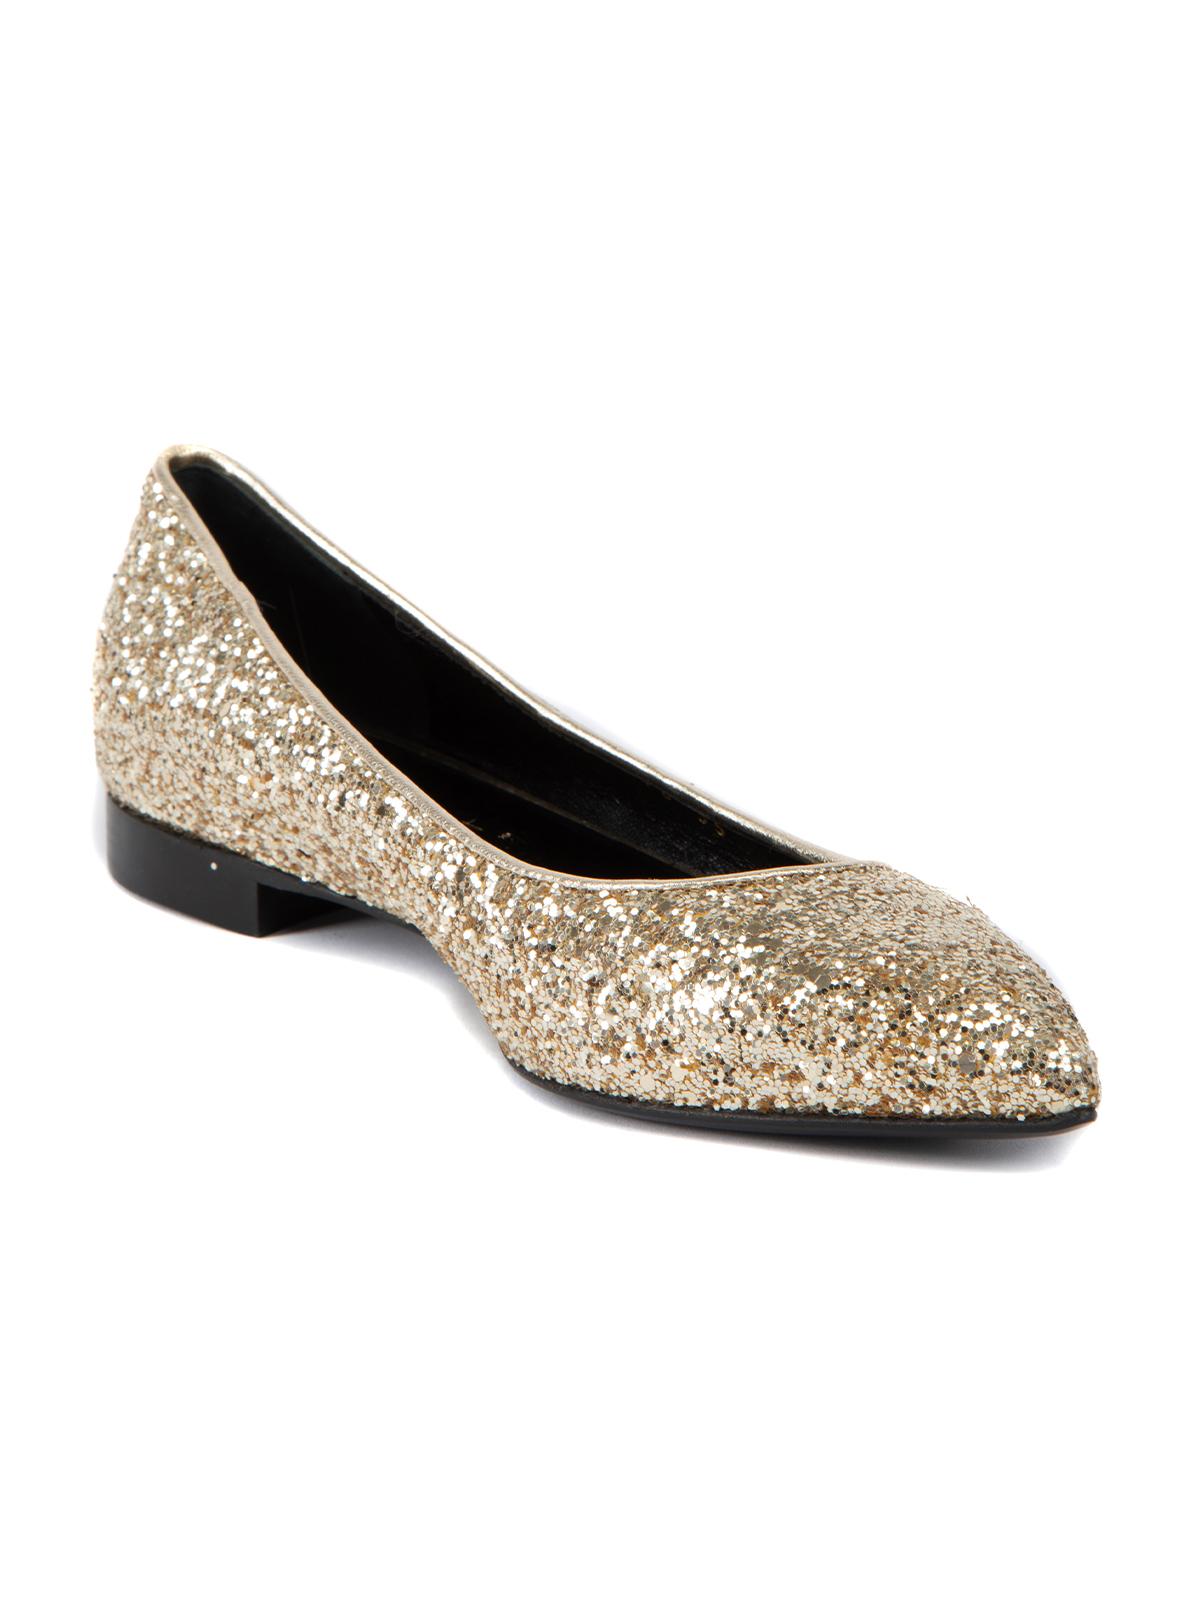 CONDITION is Never Worn. No visible wear to flats is evident, however some glitter has come off the shoes due to storage on this used Saint Laurent designer resale item. This item comes with the original dust bags. Details Gold Glitter Flat Point